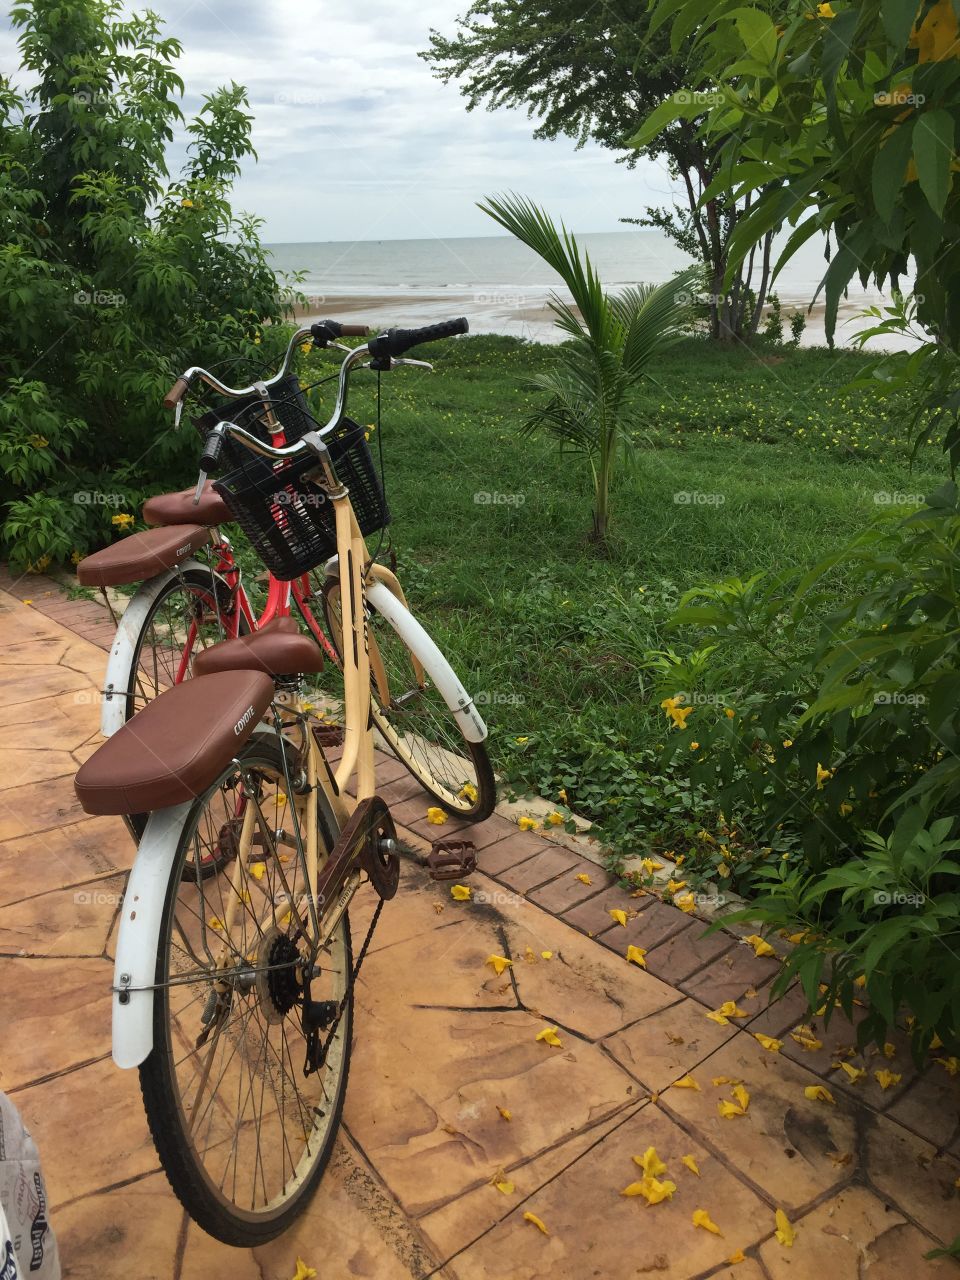 A beautiful day for a cycle along Thailand’s central coast